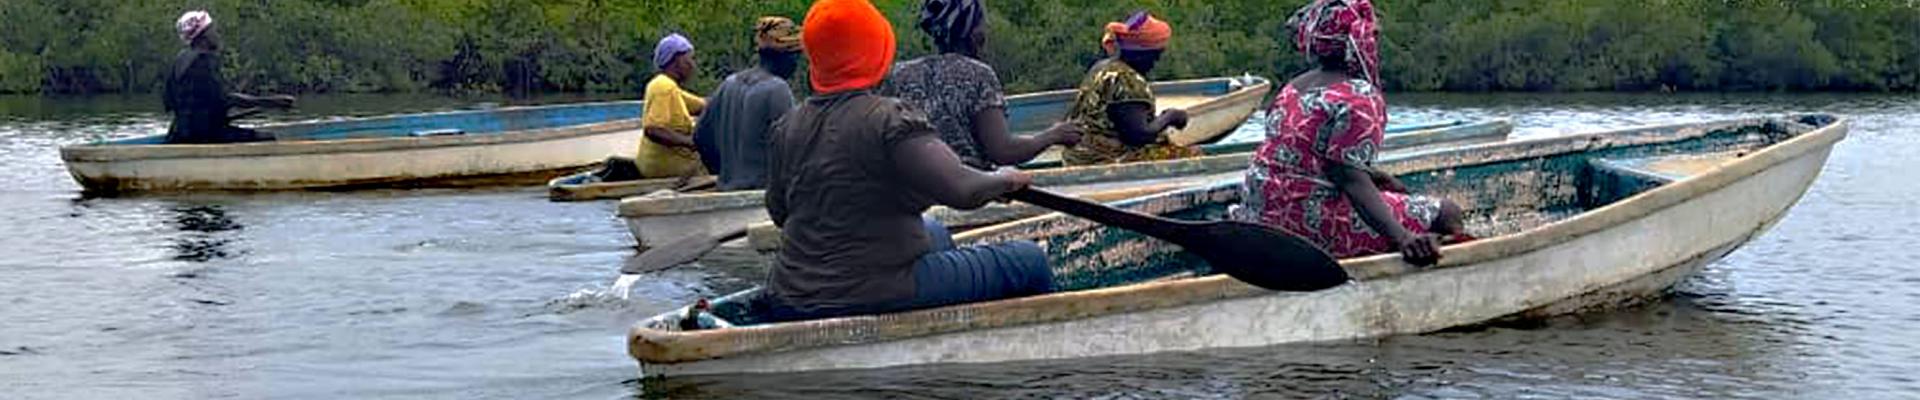 Women paddling canoes to harvest oysters